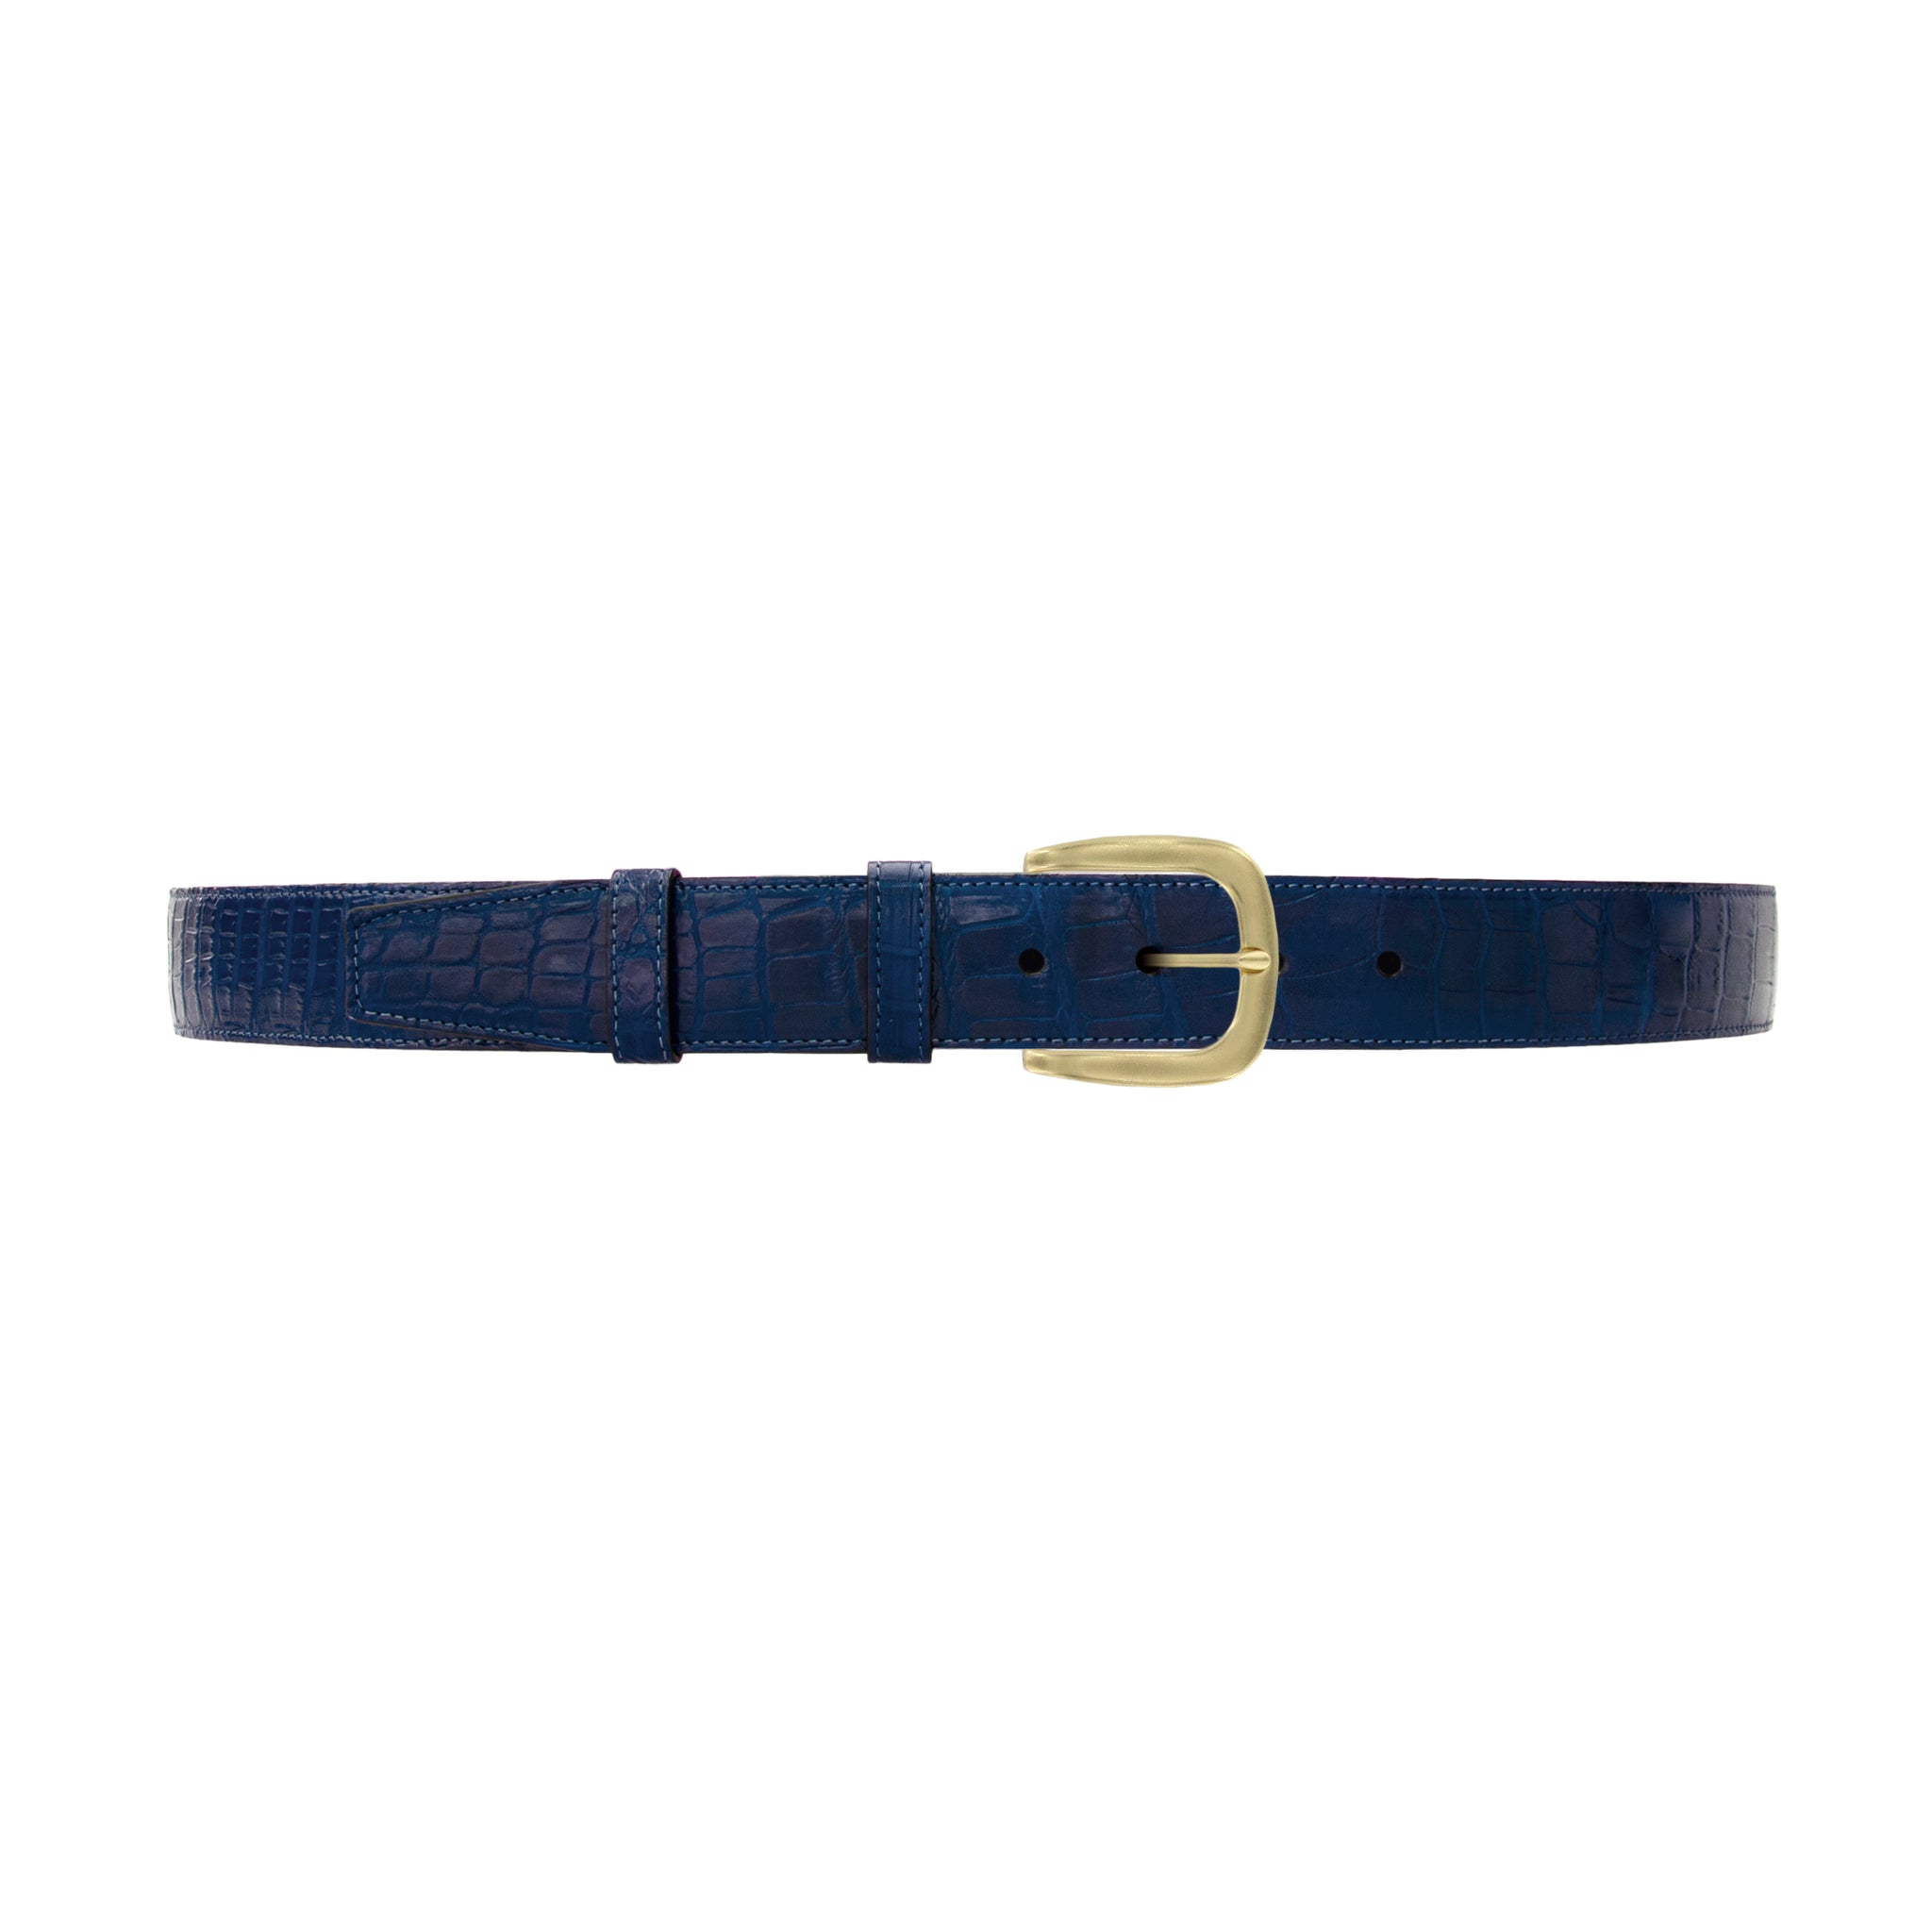 1 1/2" Royal Seasonal Belt with Oxford Cocktail Buckle in Brass